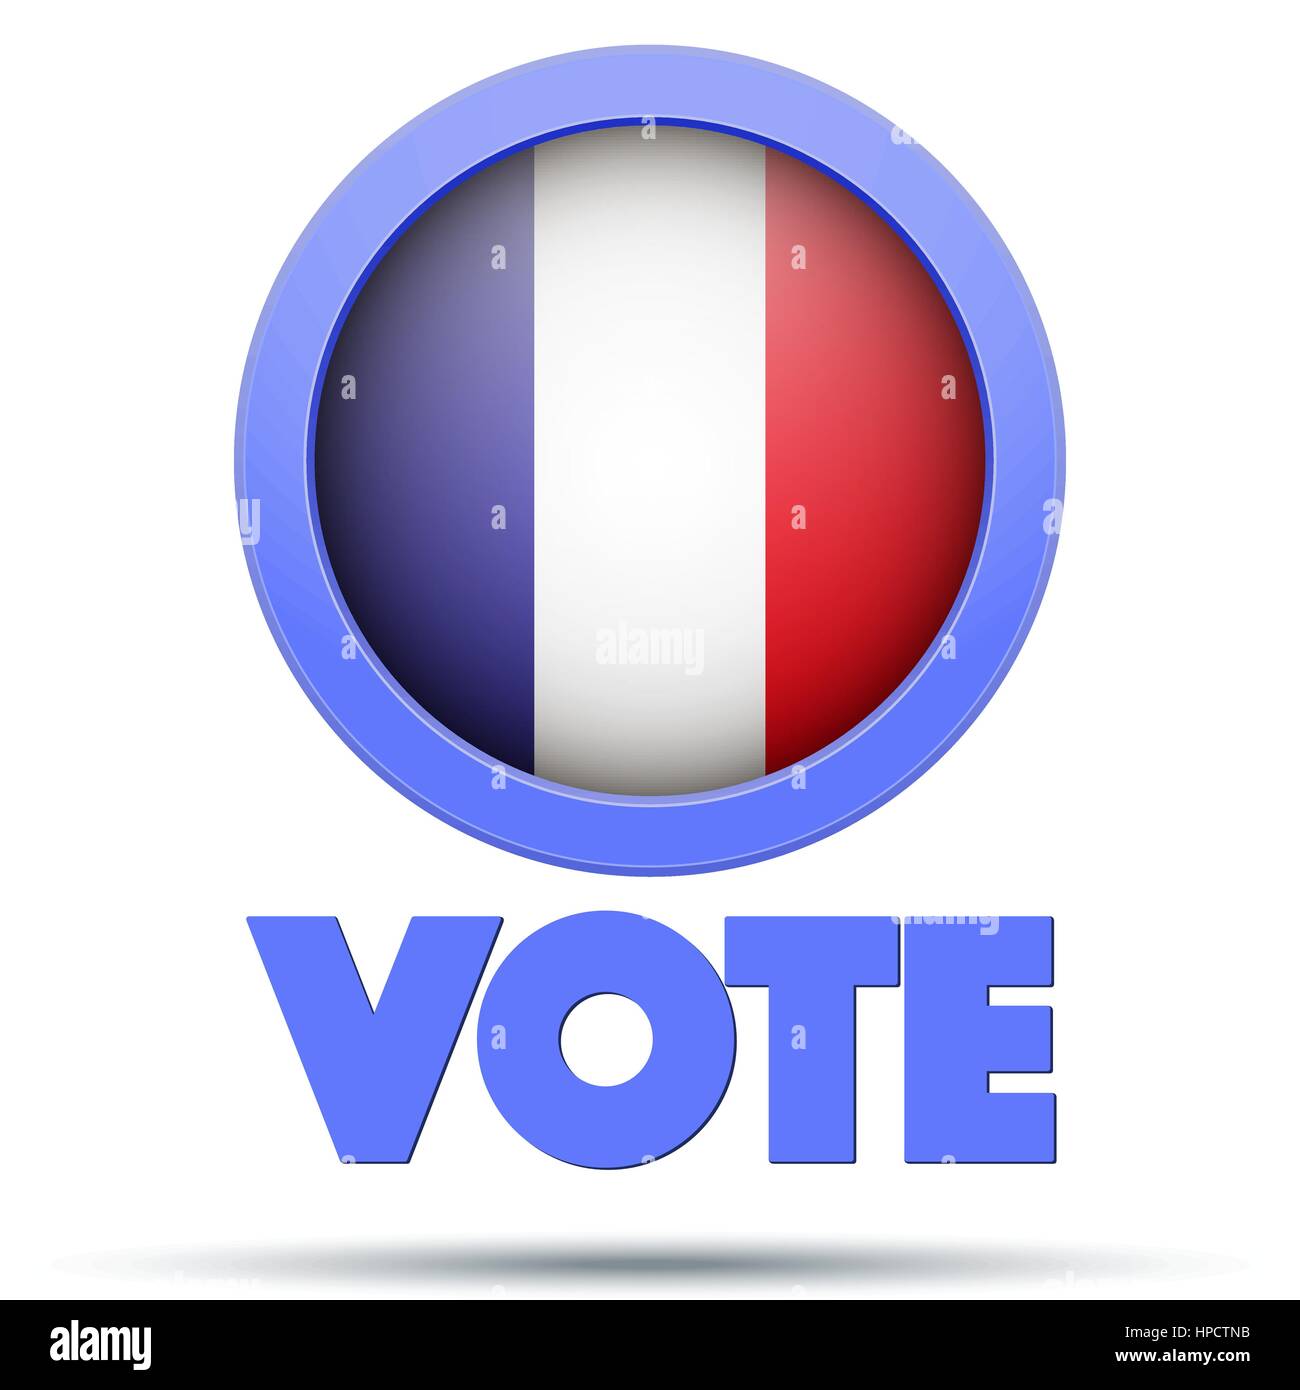 Circle Symbol of Election 2017 in France. Stock Vector